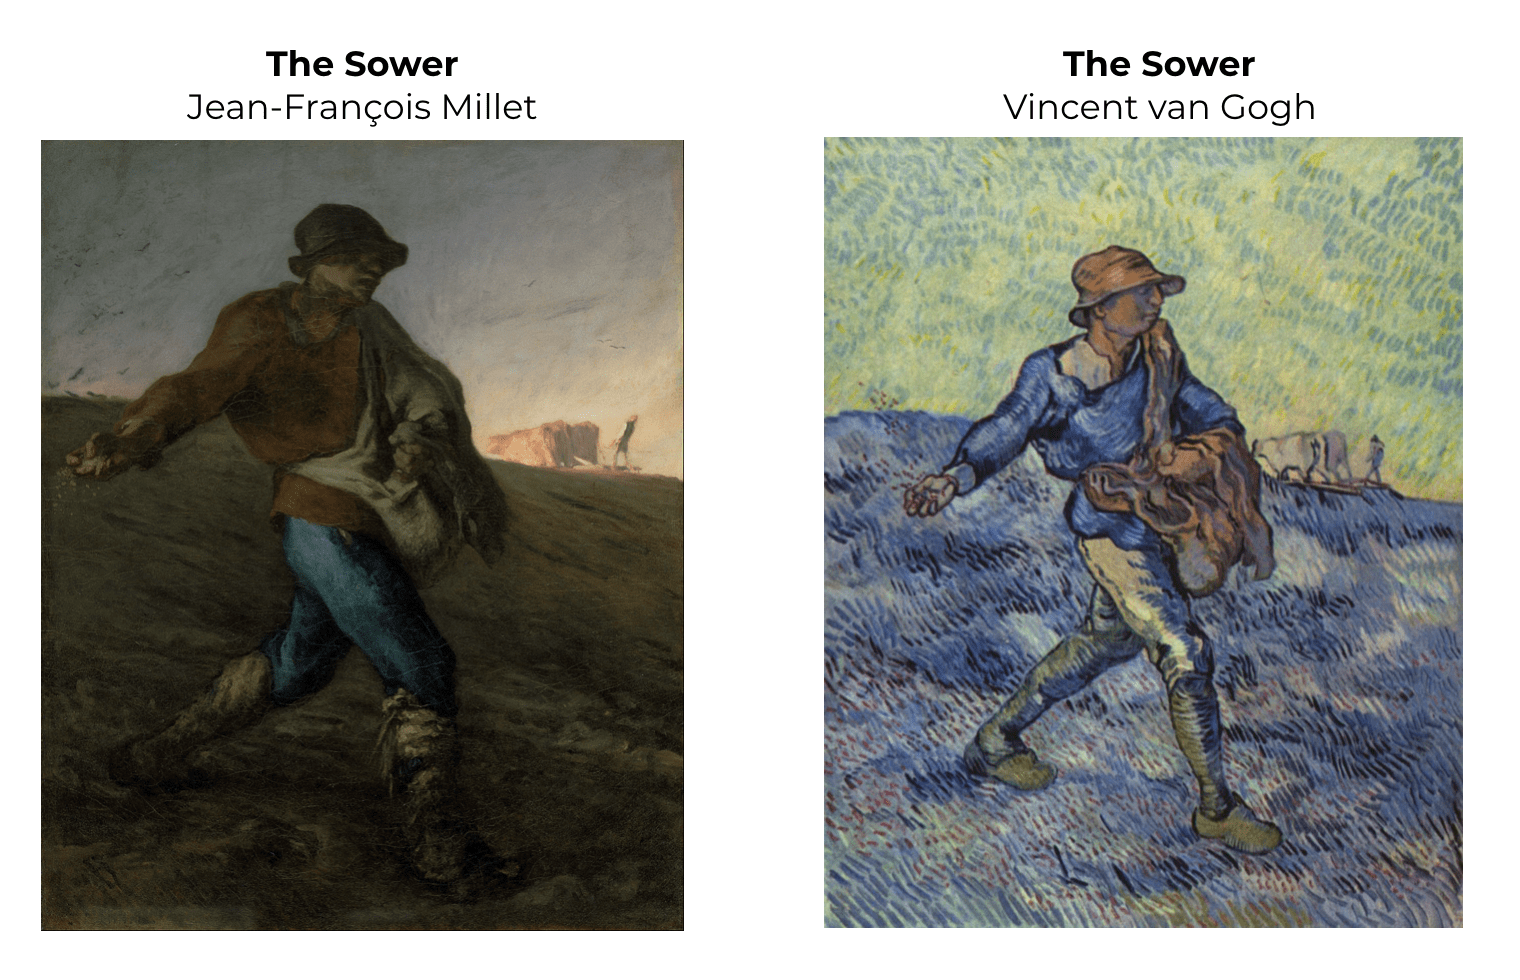 An image of two paintings side by side: Millet's The Sower, and van Gogh's The Sower.  They show that van Gogh reproduced the composition and structure of Millets work almost exactly, except he changed the color and final styling.